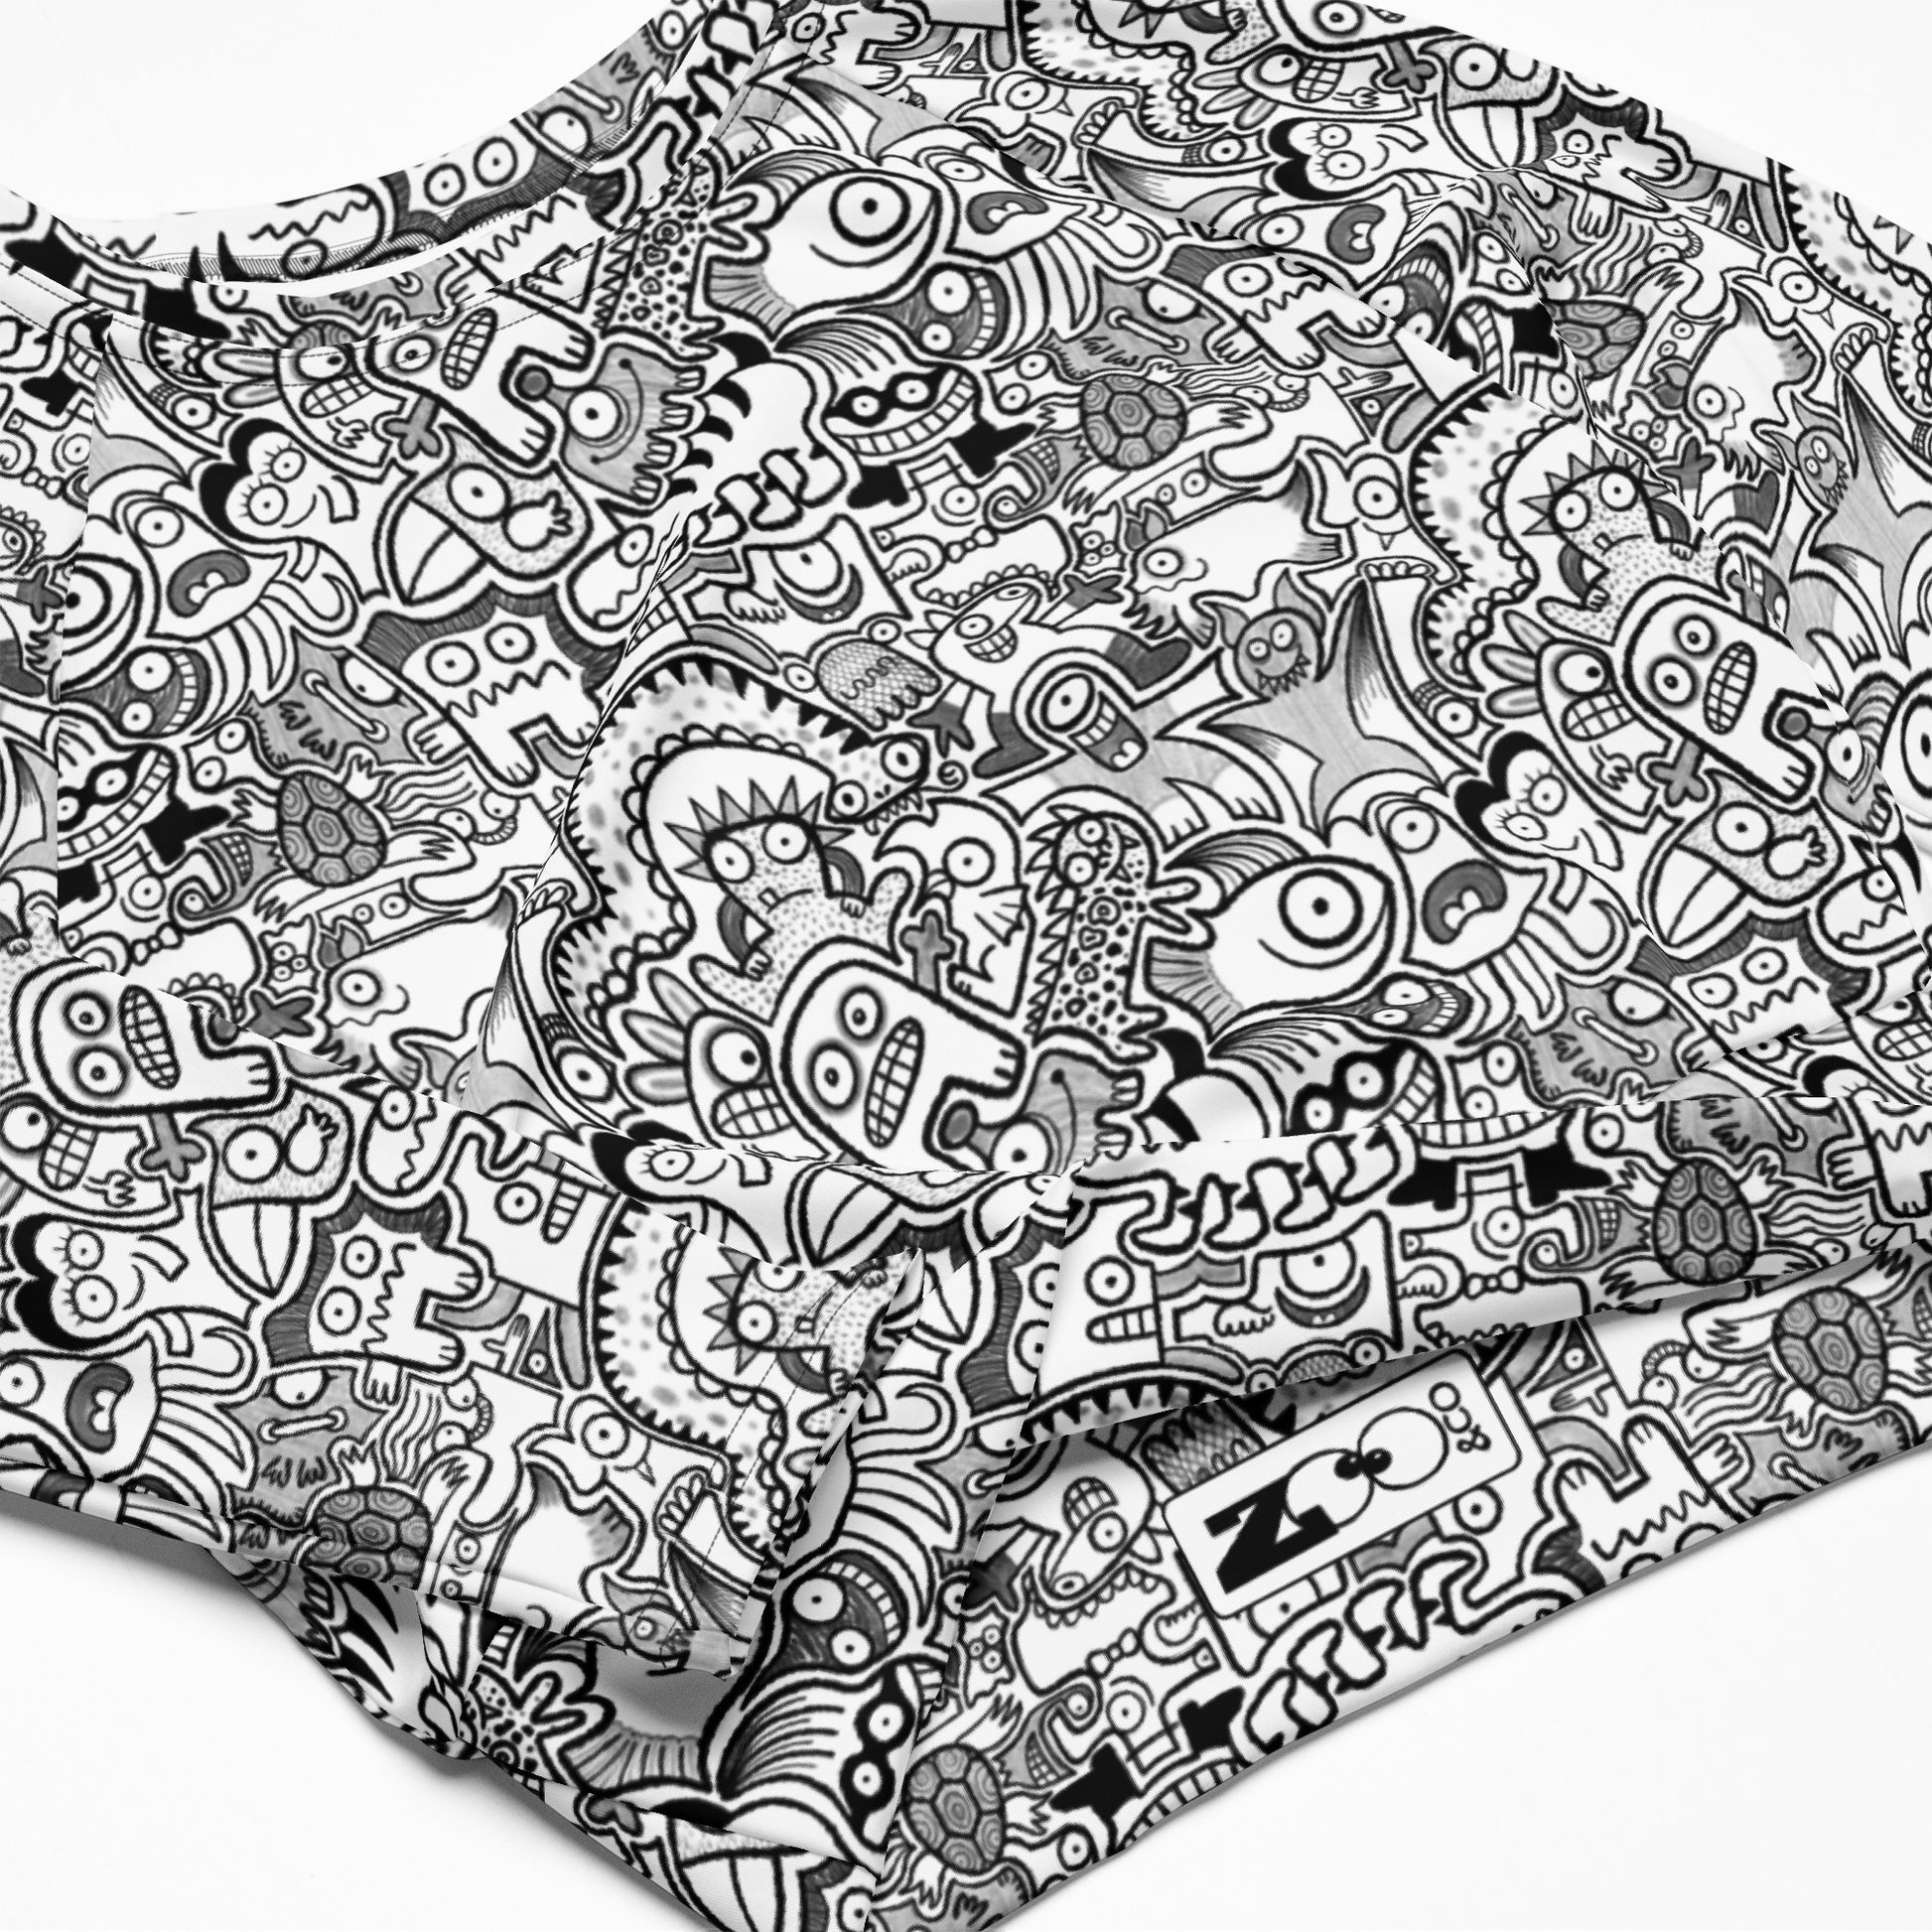 Fill your World with Cool Doodles Recycled long-sleeve crop top. Product detail